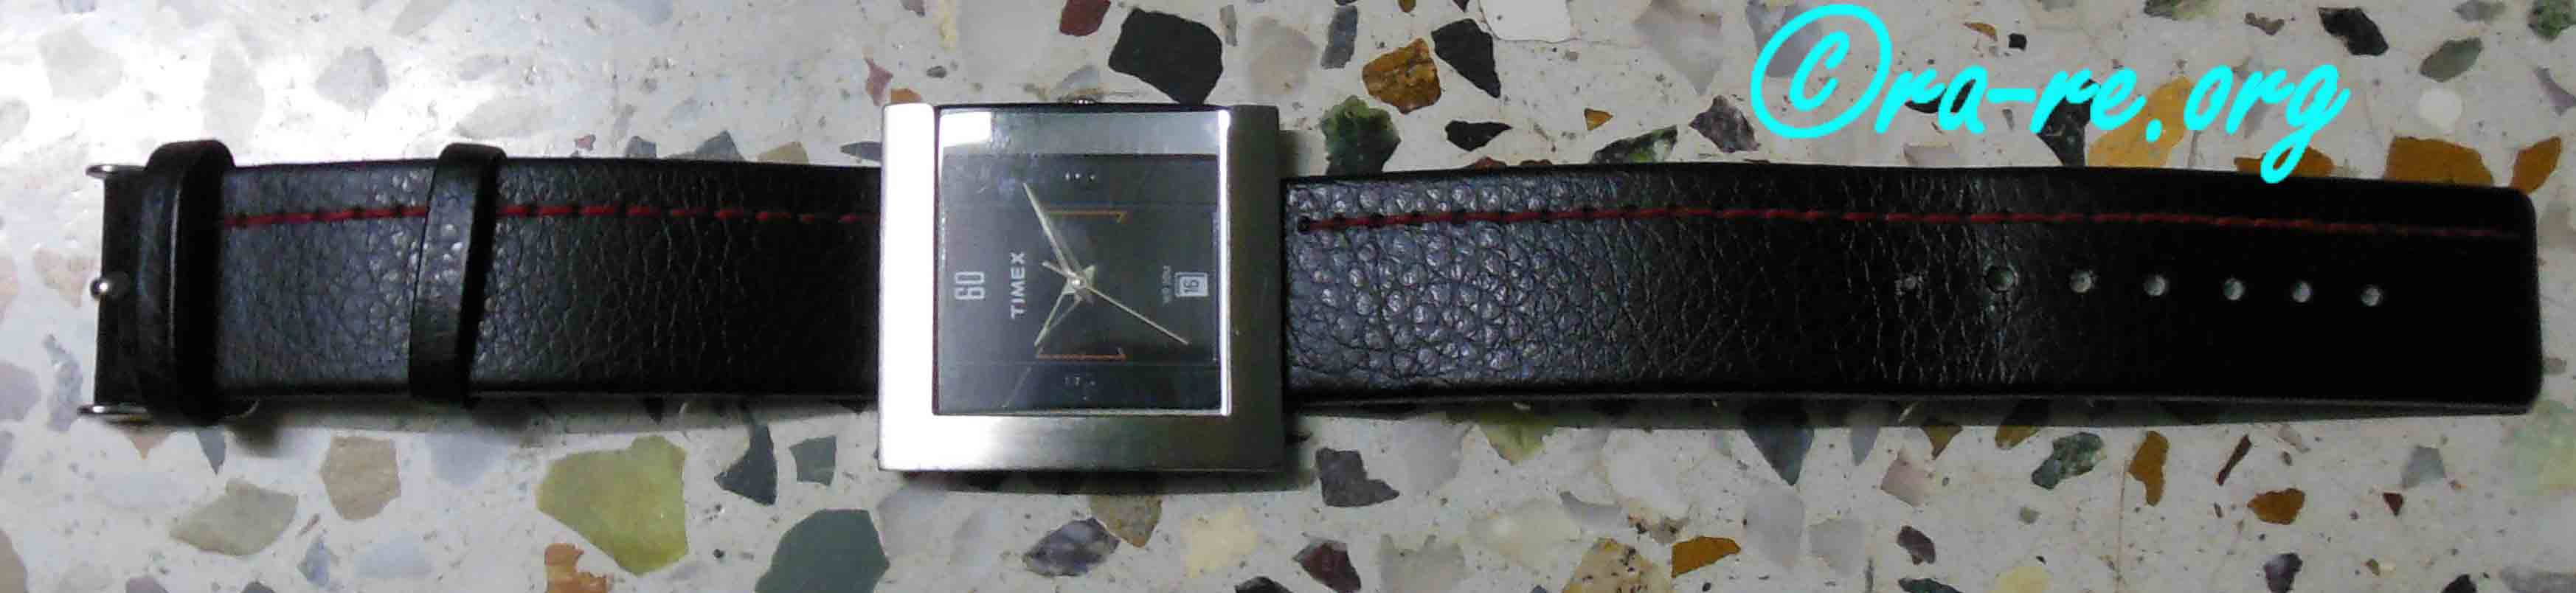 Timex-watch-showing-time-10-10-35